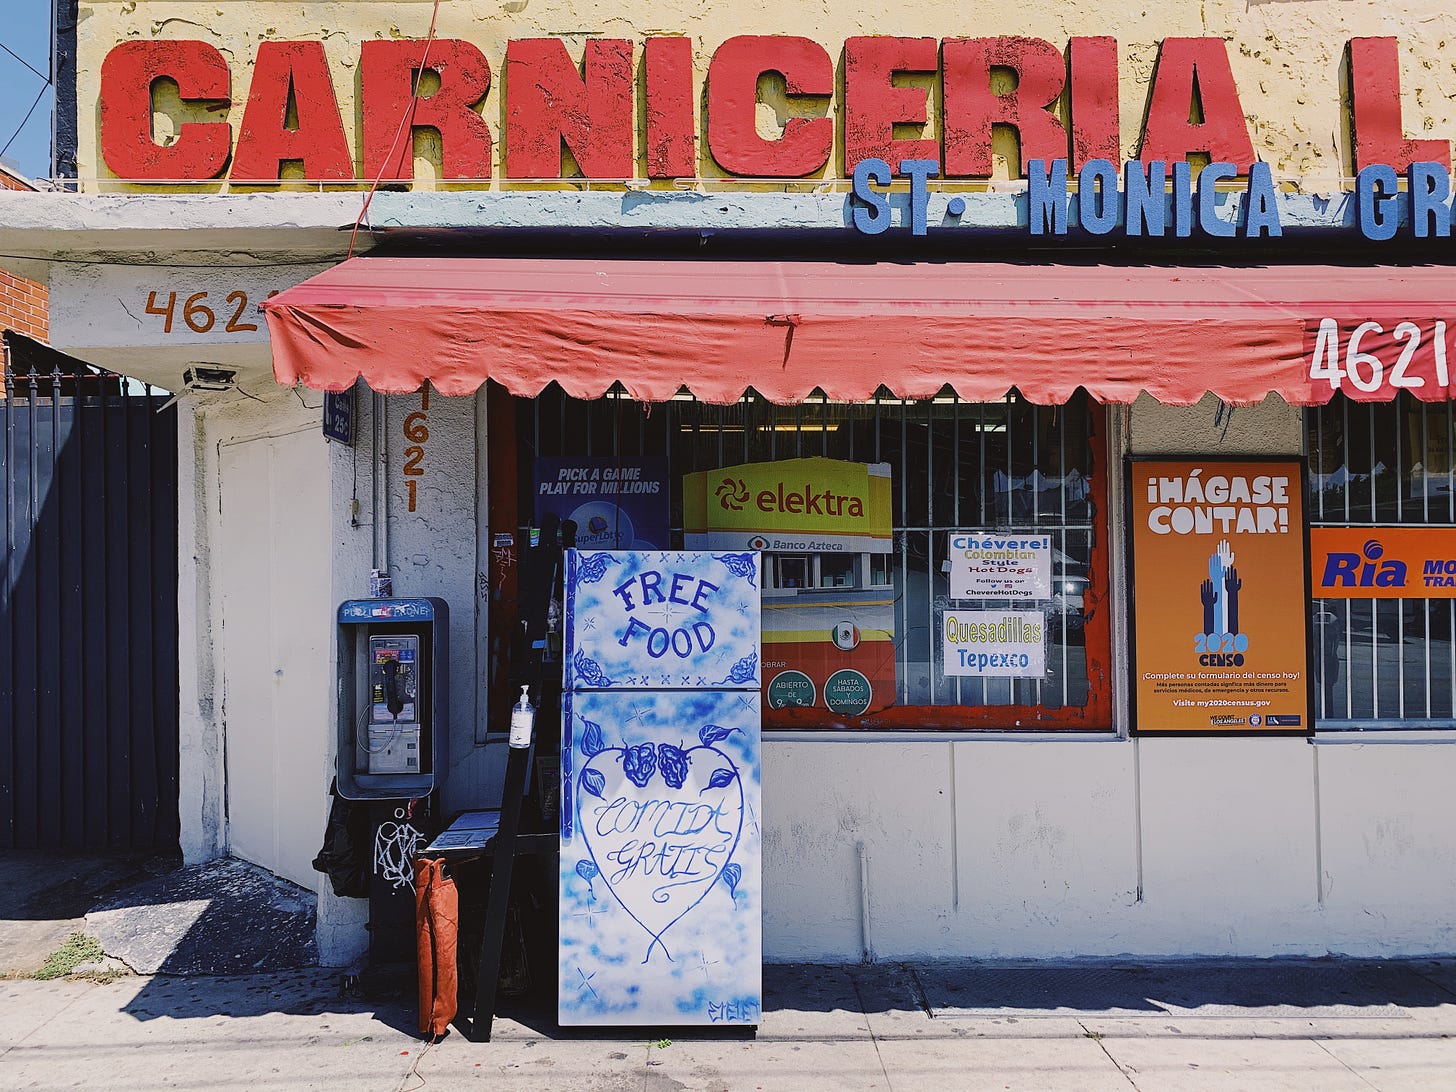 Yellow and white building with the words “Carniceria” in red block letters at the top and a red awning below. A white fridge with blue paint and the words “free food, comida gratis” written on the front. The fridge is next to a payphone.